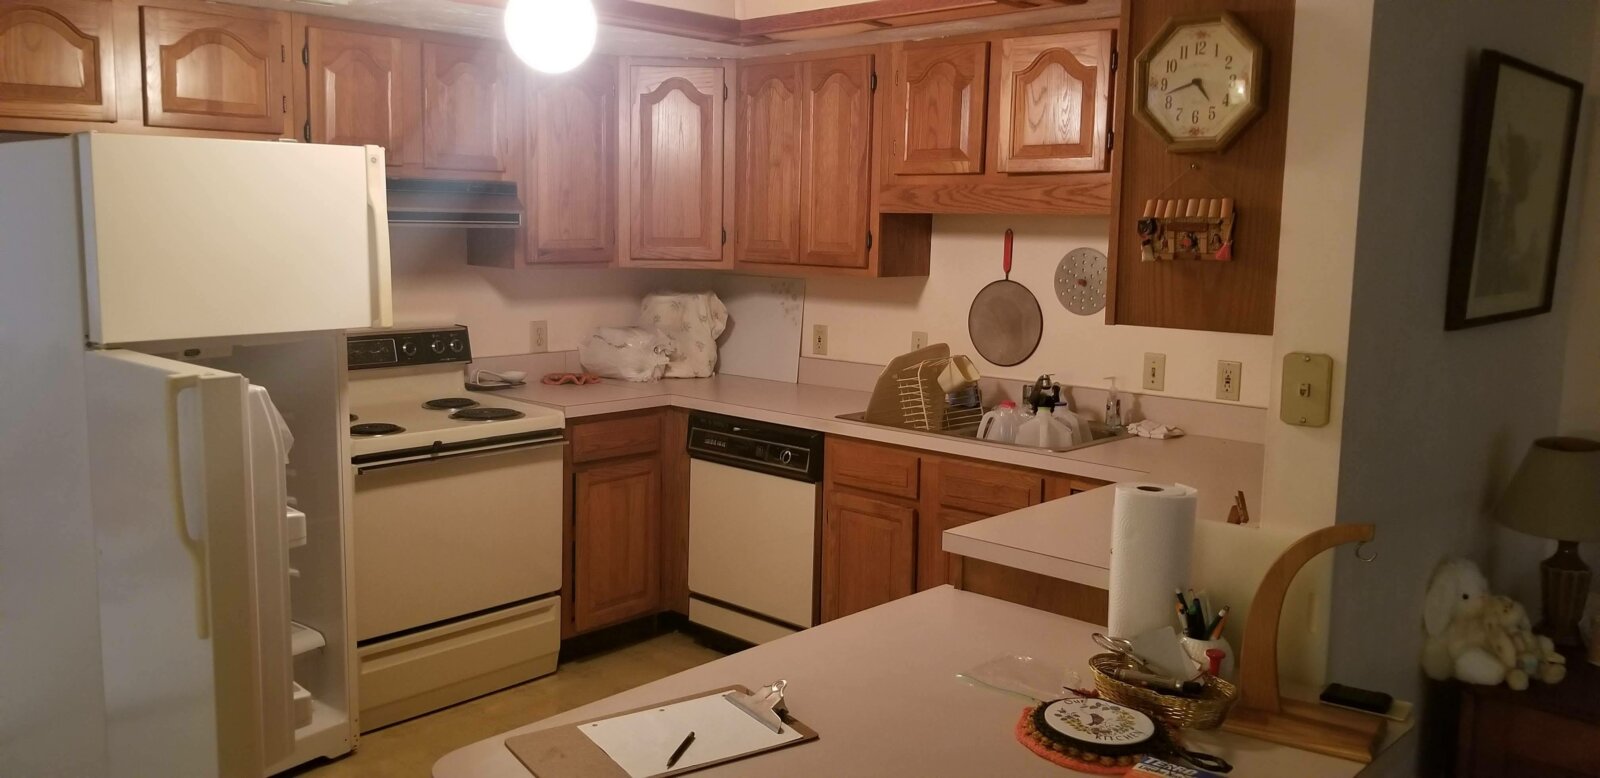 Kitchen photo of new property for sale in Lehigh Acres Florida